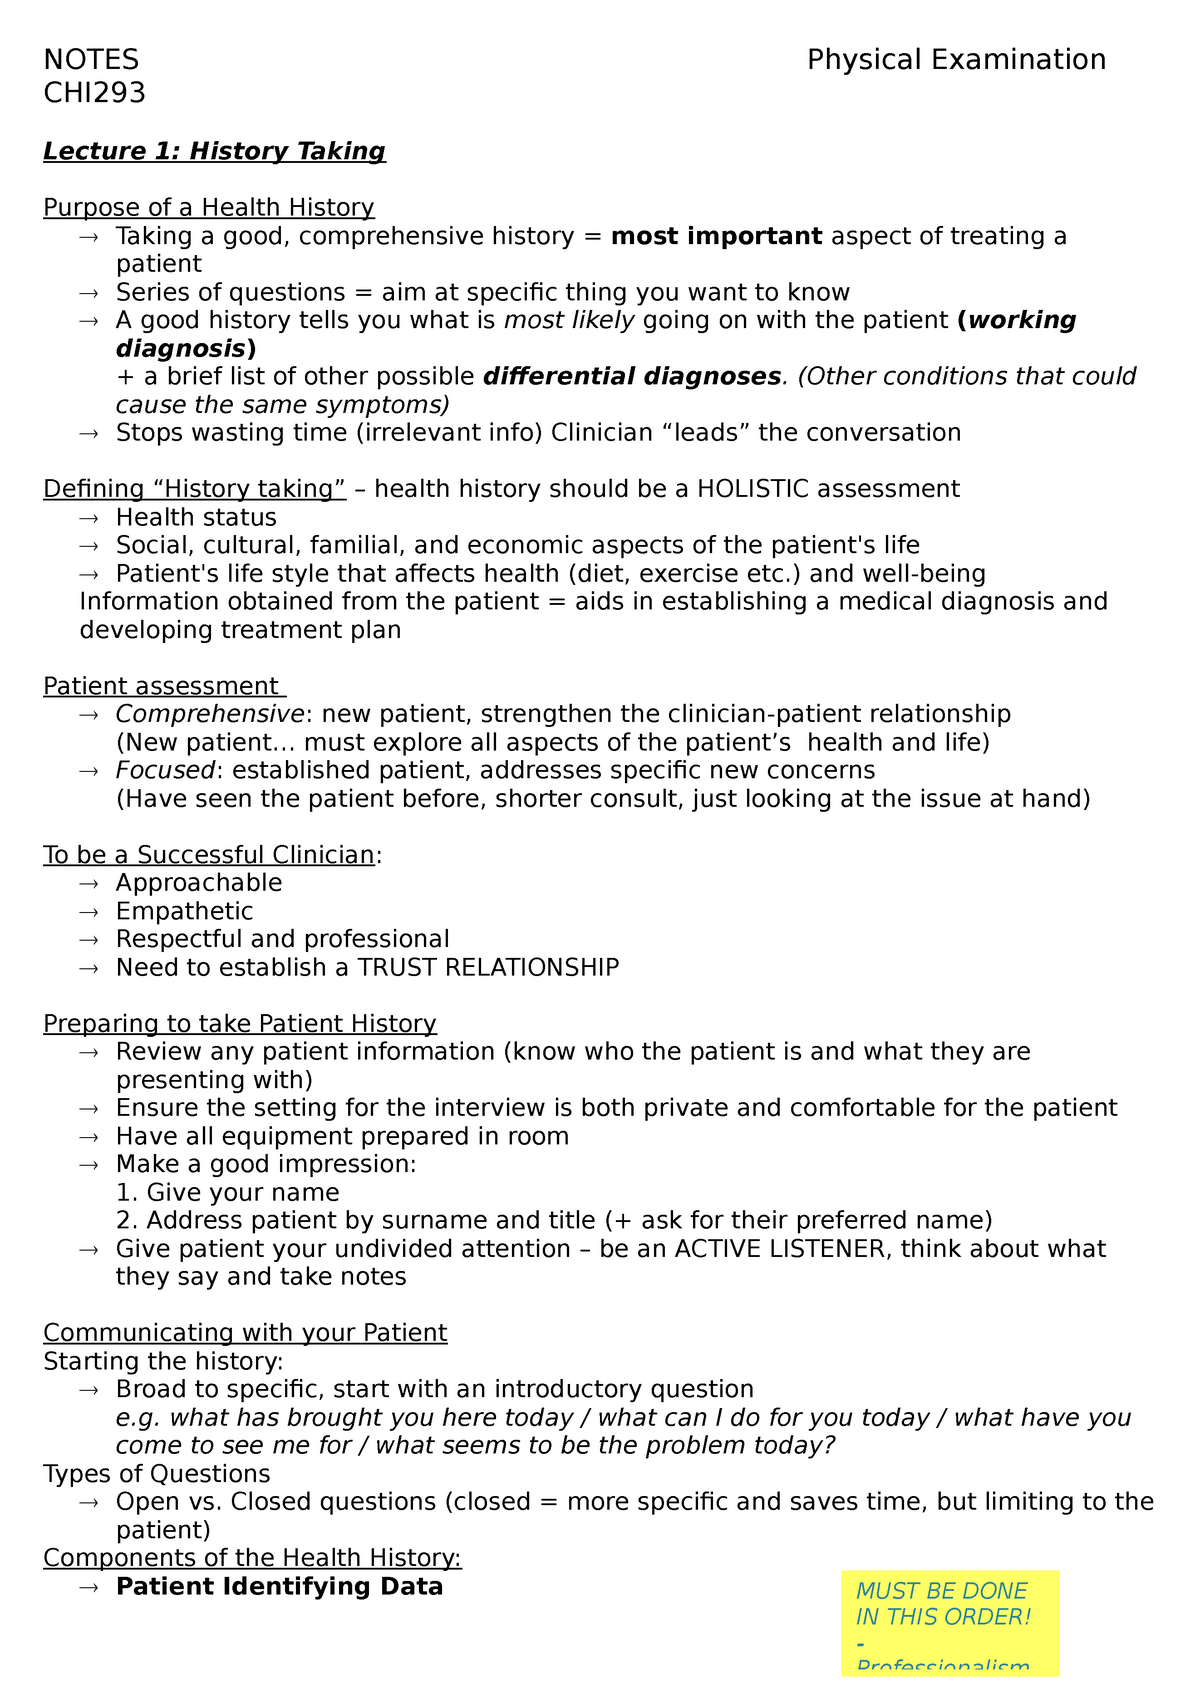 Physical Examination Notes and Self Directed study NOTES CHI293